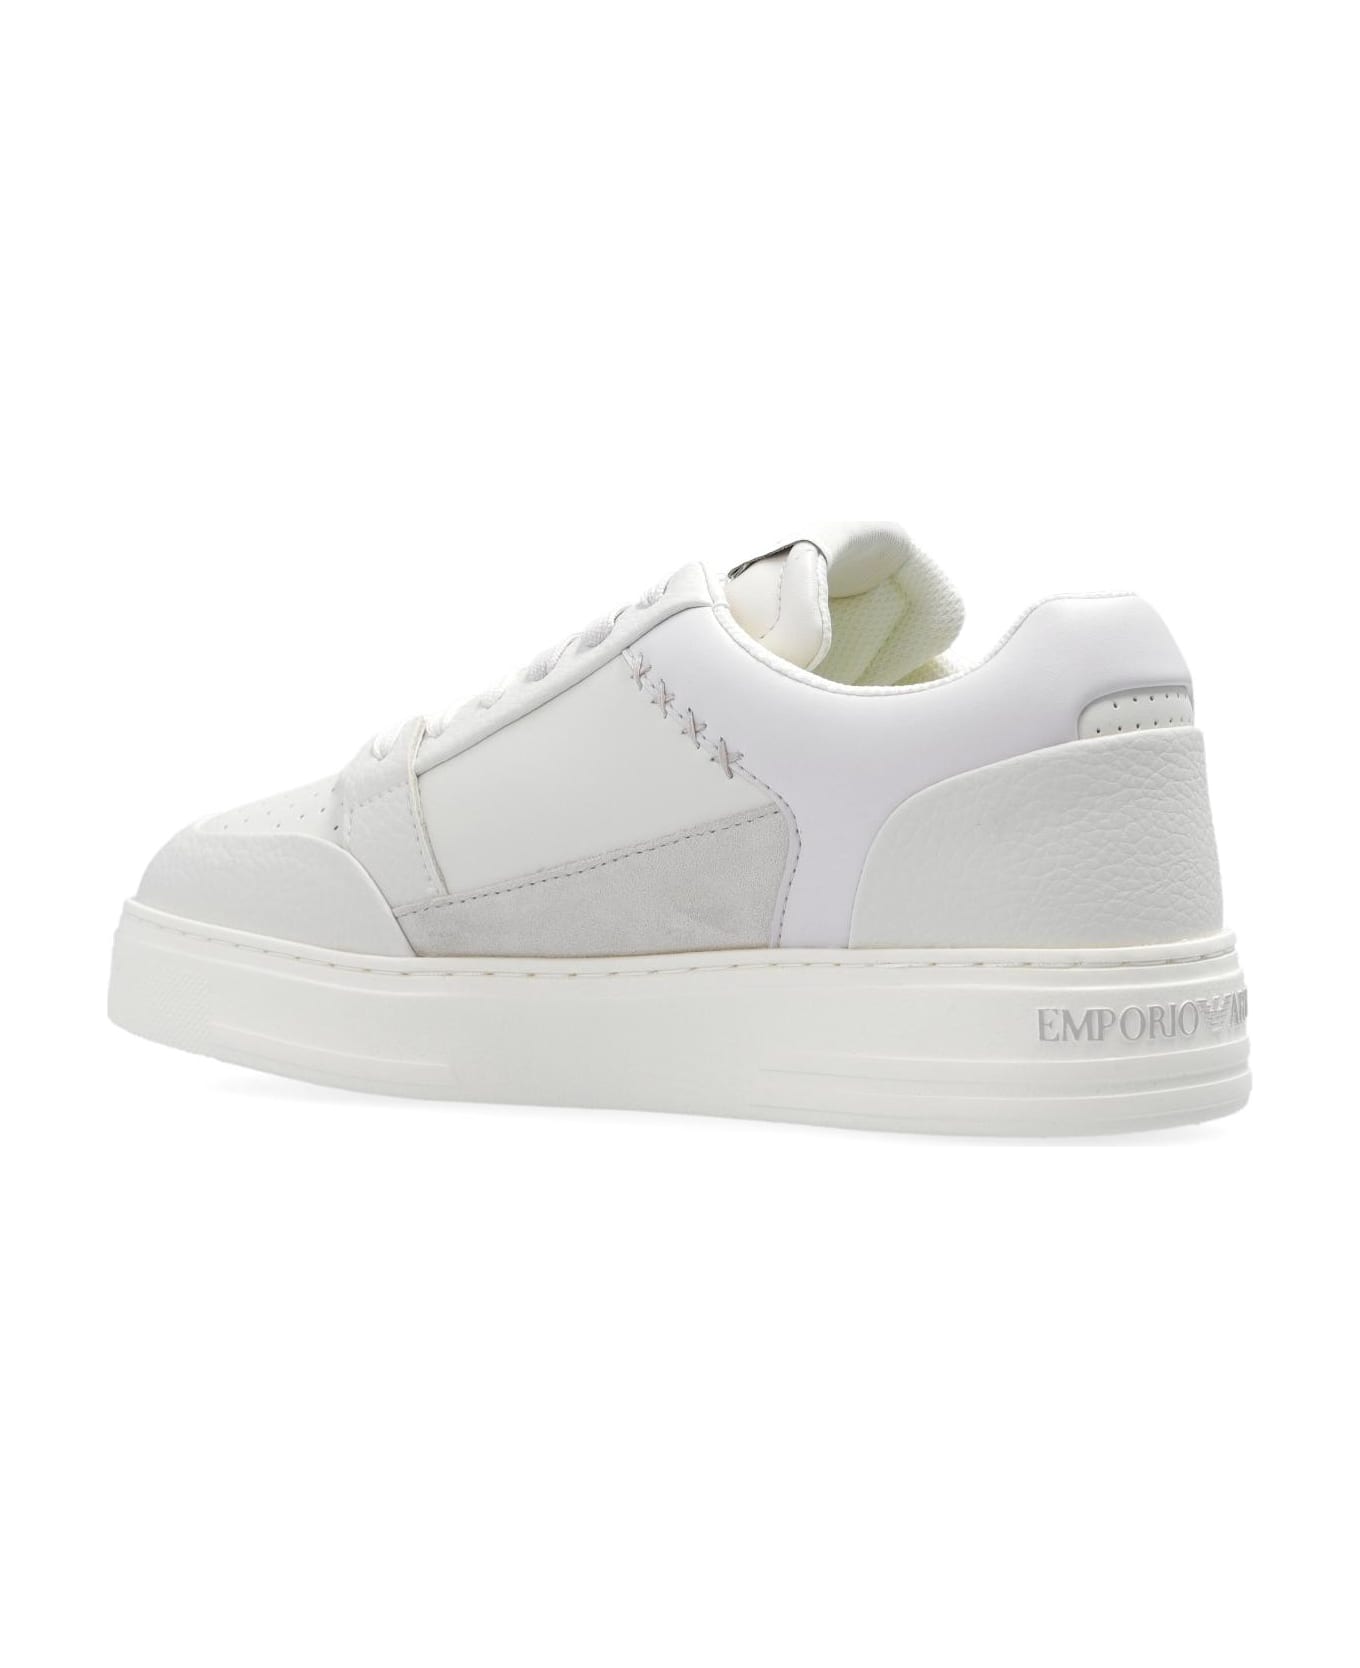 Emporio Armani Sneakers With Logo スニーカー